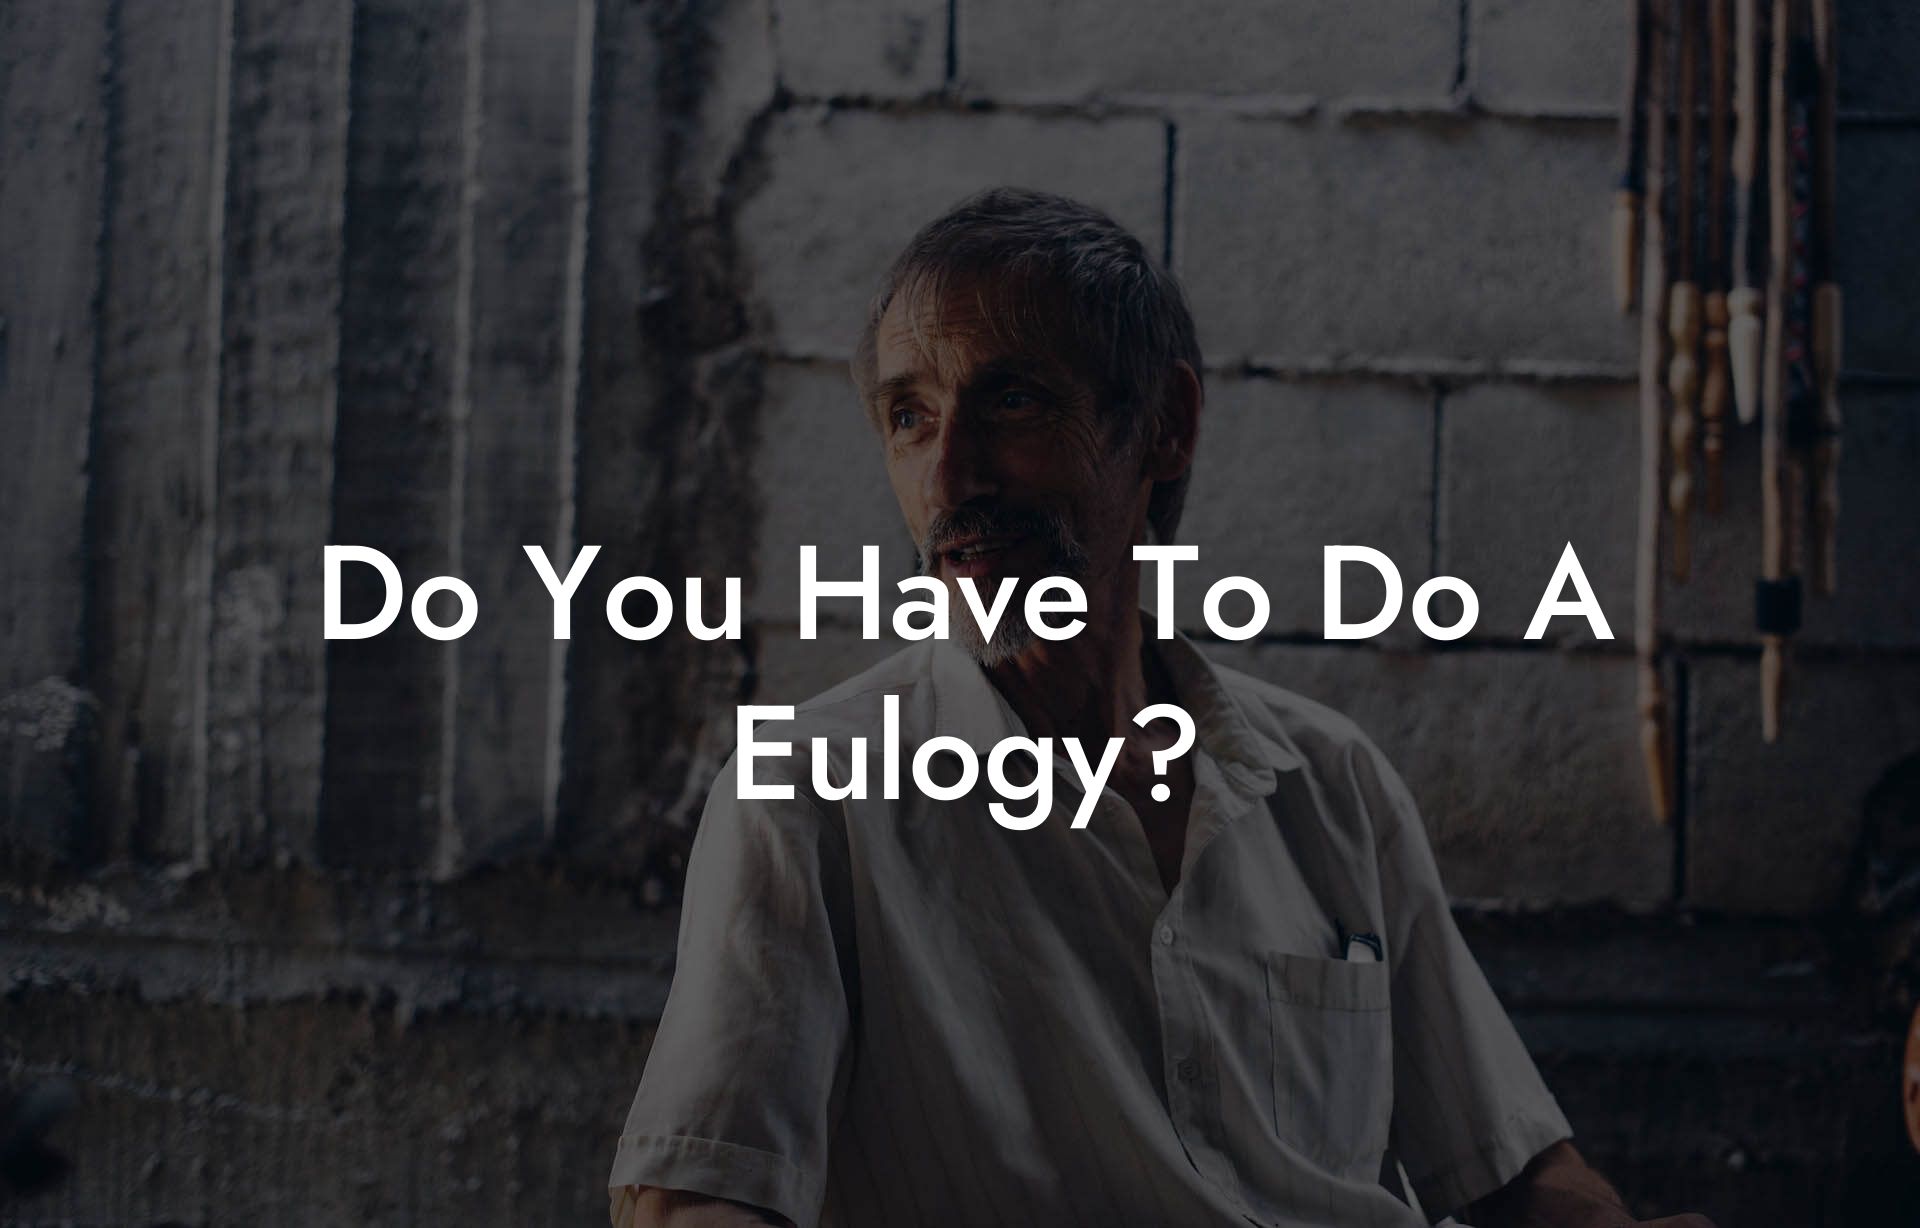 Do You Have To Do A Eulogy?